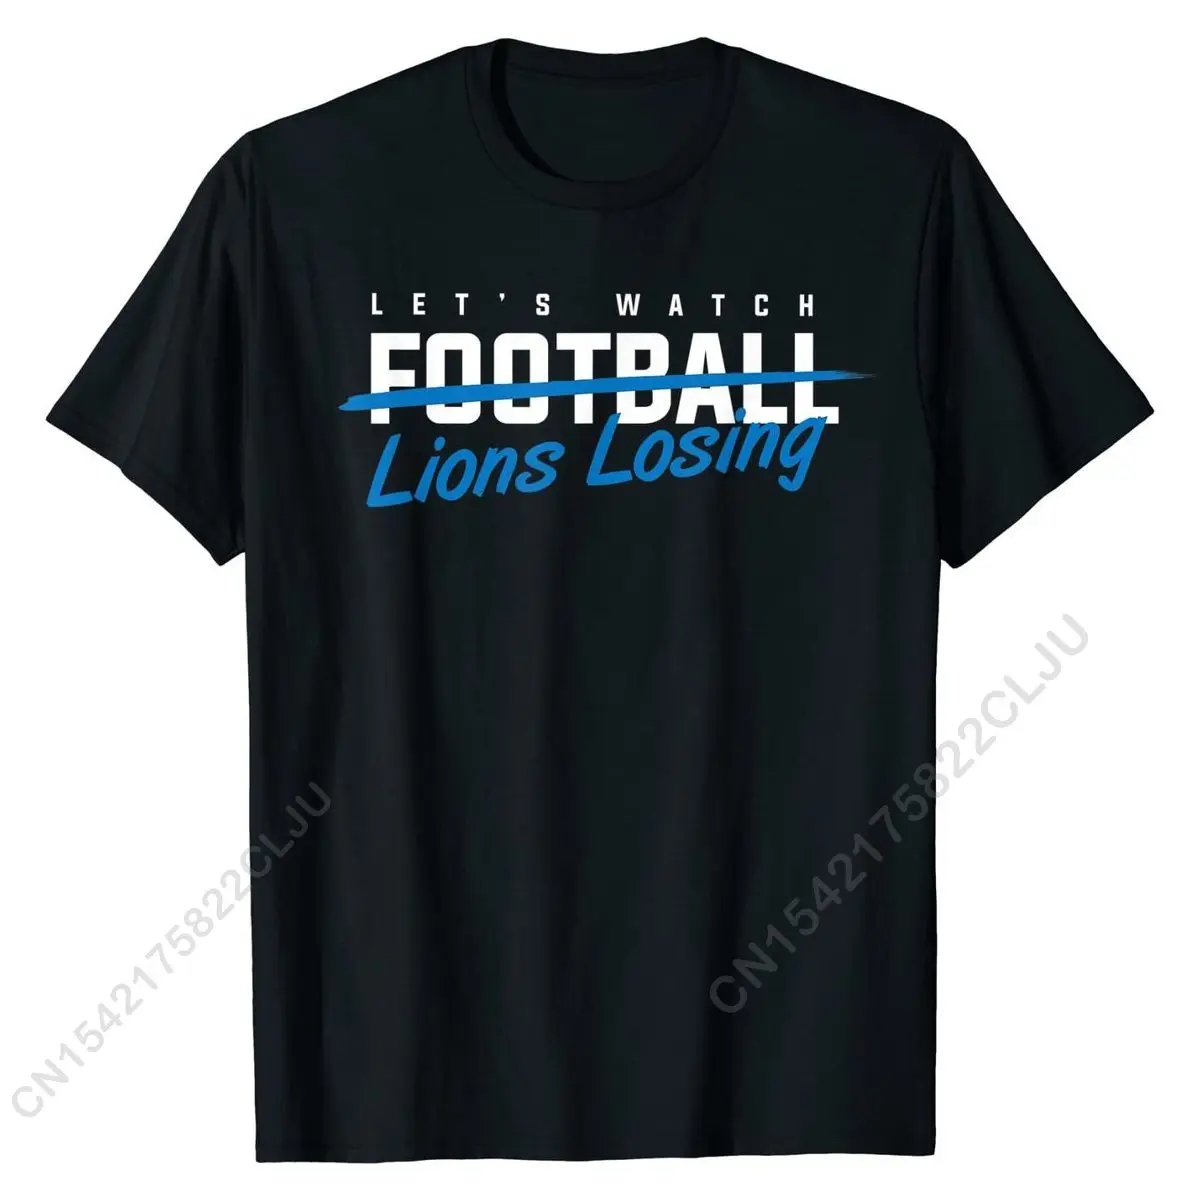 Let's Watch Detroit Lion Losing Funny Football T-Shirt Top T-shirts For Men Casual T Shirt Oversized Geek Cotton